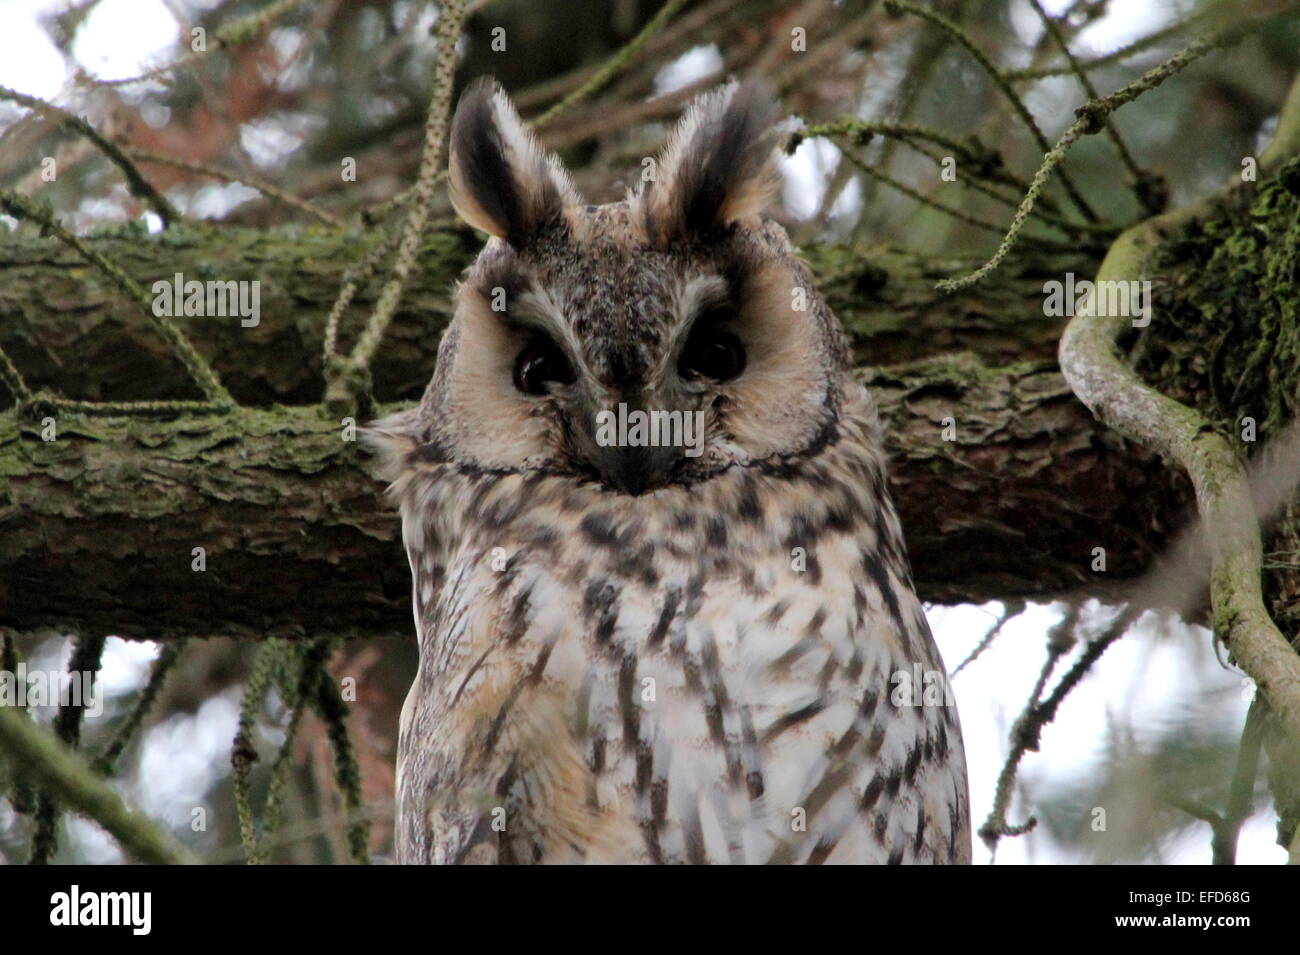 Close-up of an alert Long-eared Owl (Asio otus) in a pine tree during daytime Stock Photo